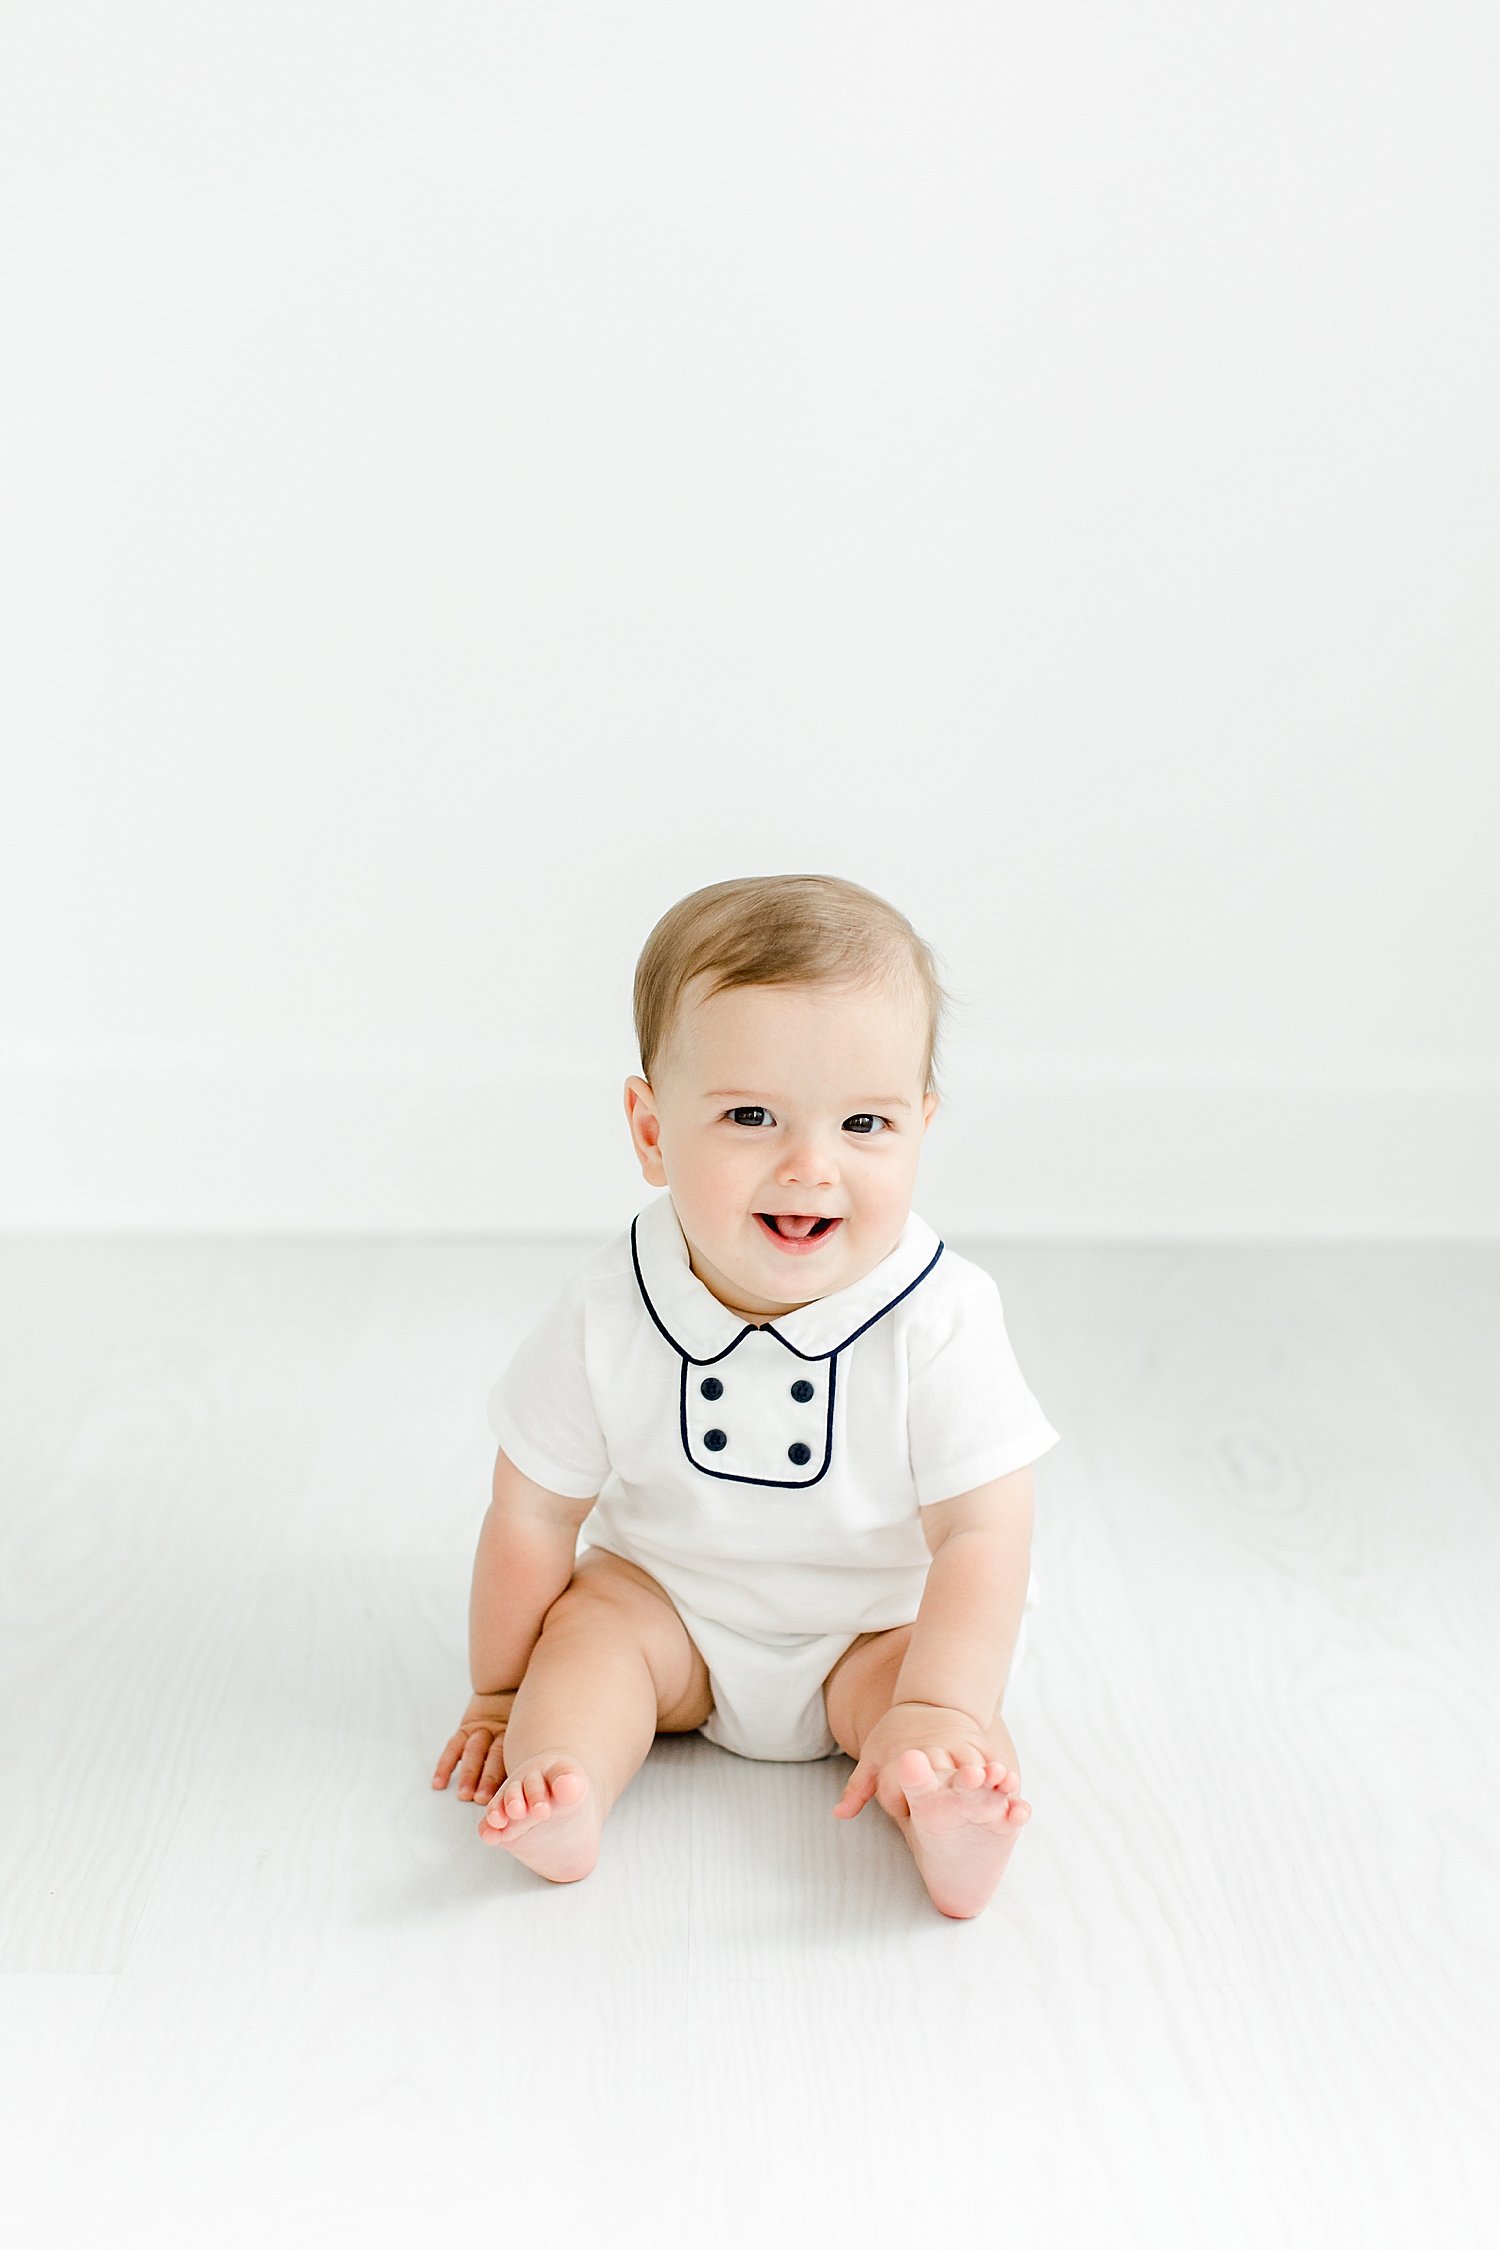 Children's portrait of eight month old. Photo by Kristin Wood Photography.